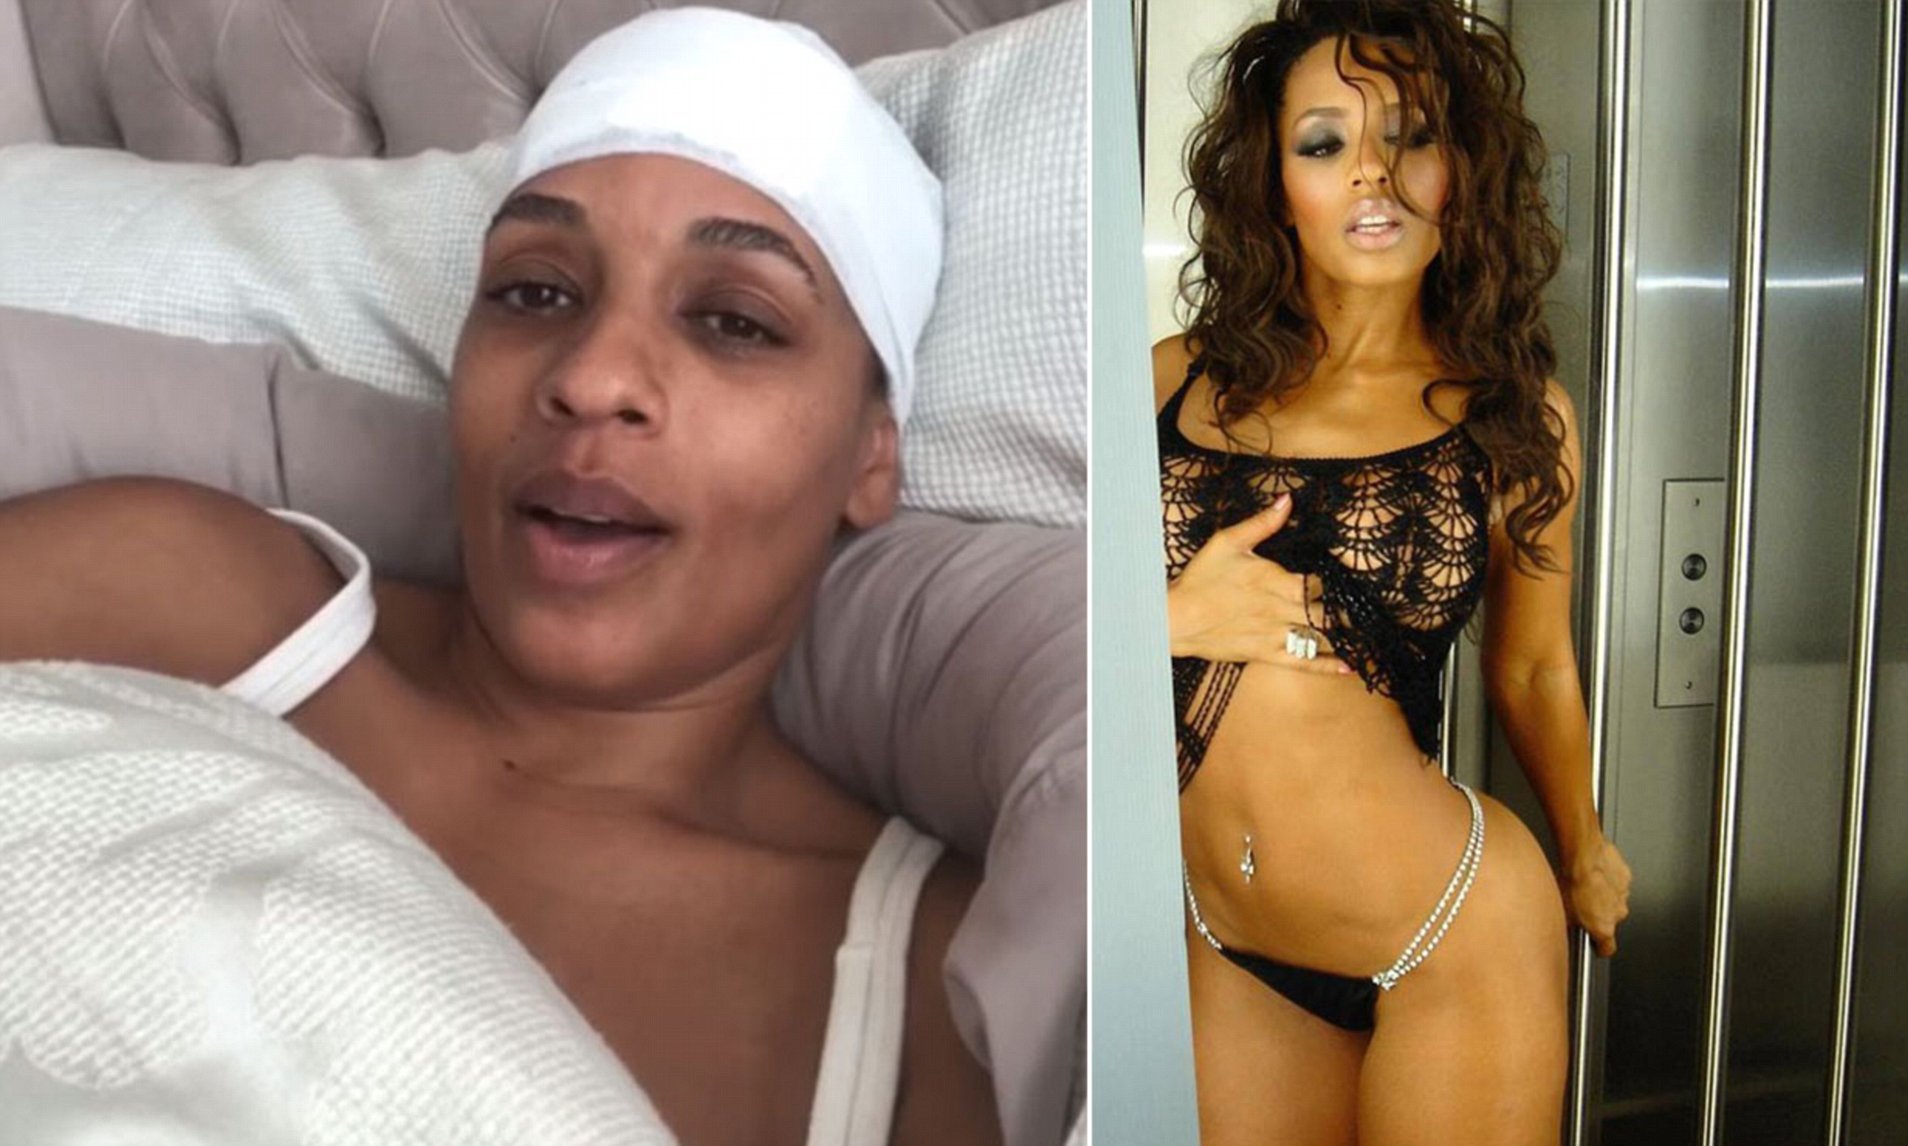 [WATCH] Melyssa Ford Sends Emotional Message Via Social Media About Nearly Fatal Car Wreck